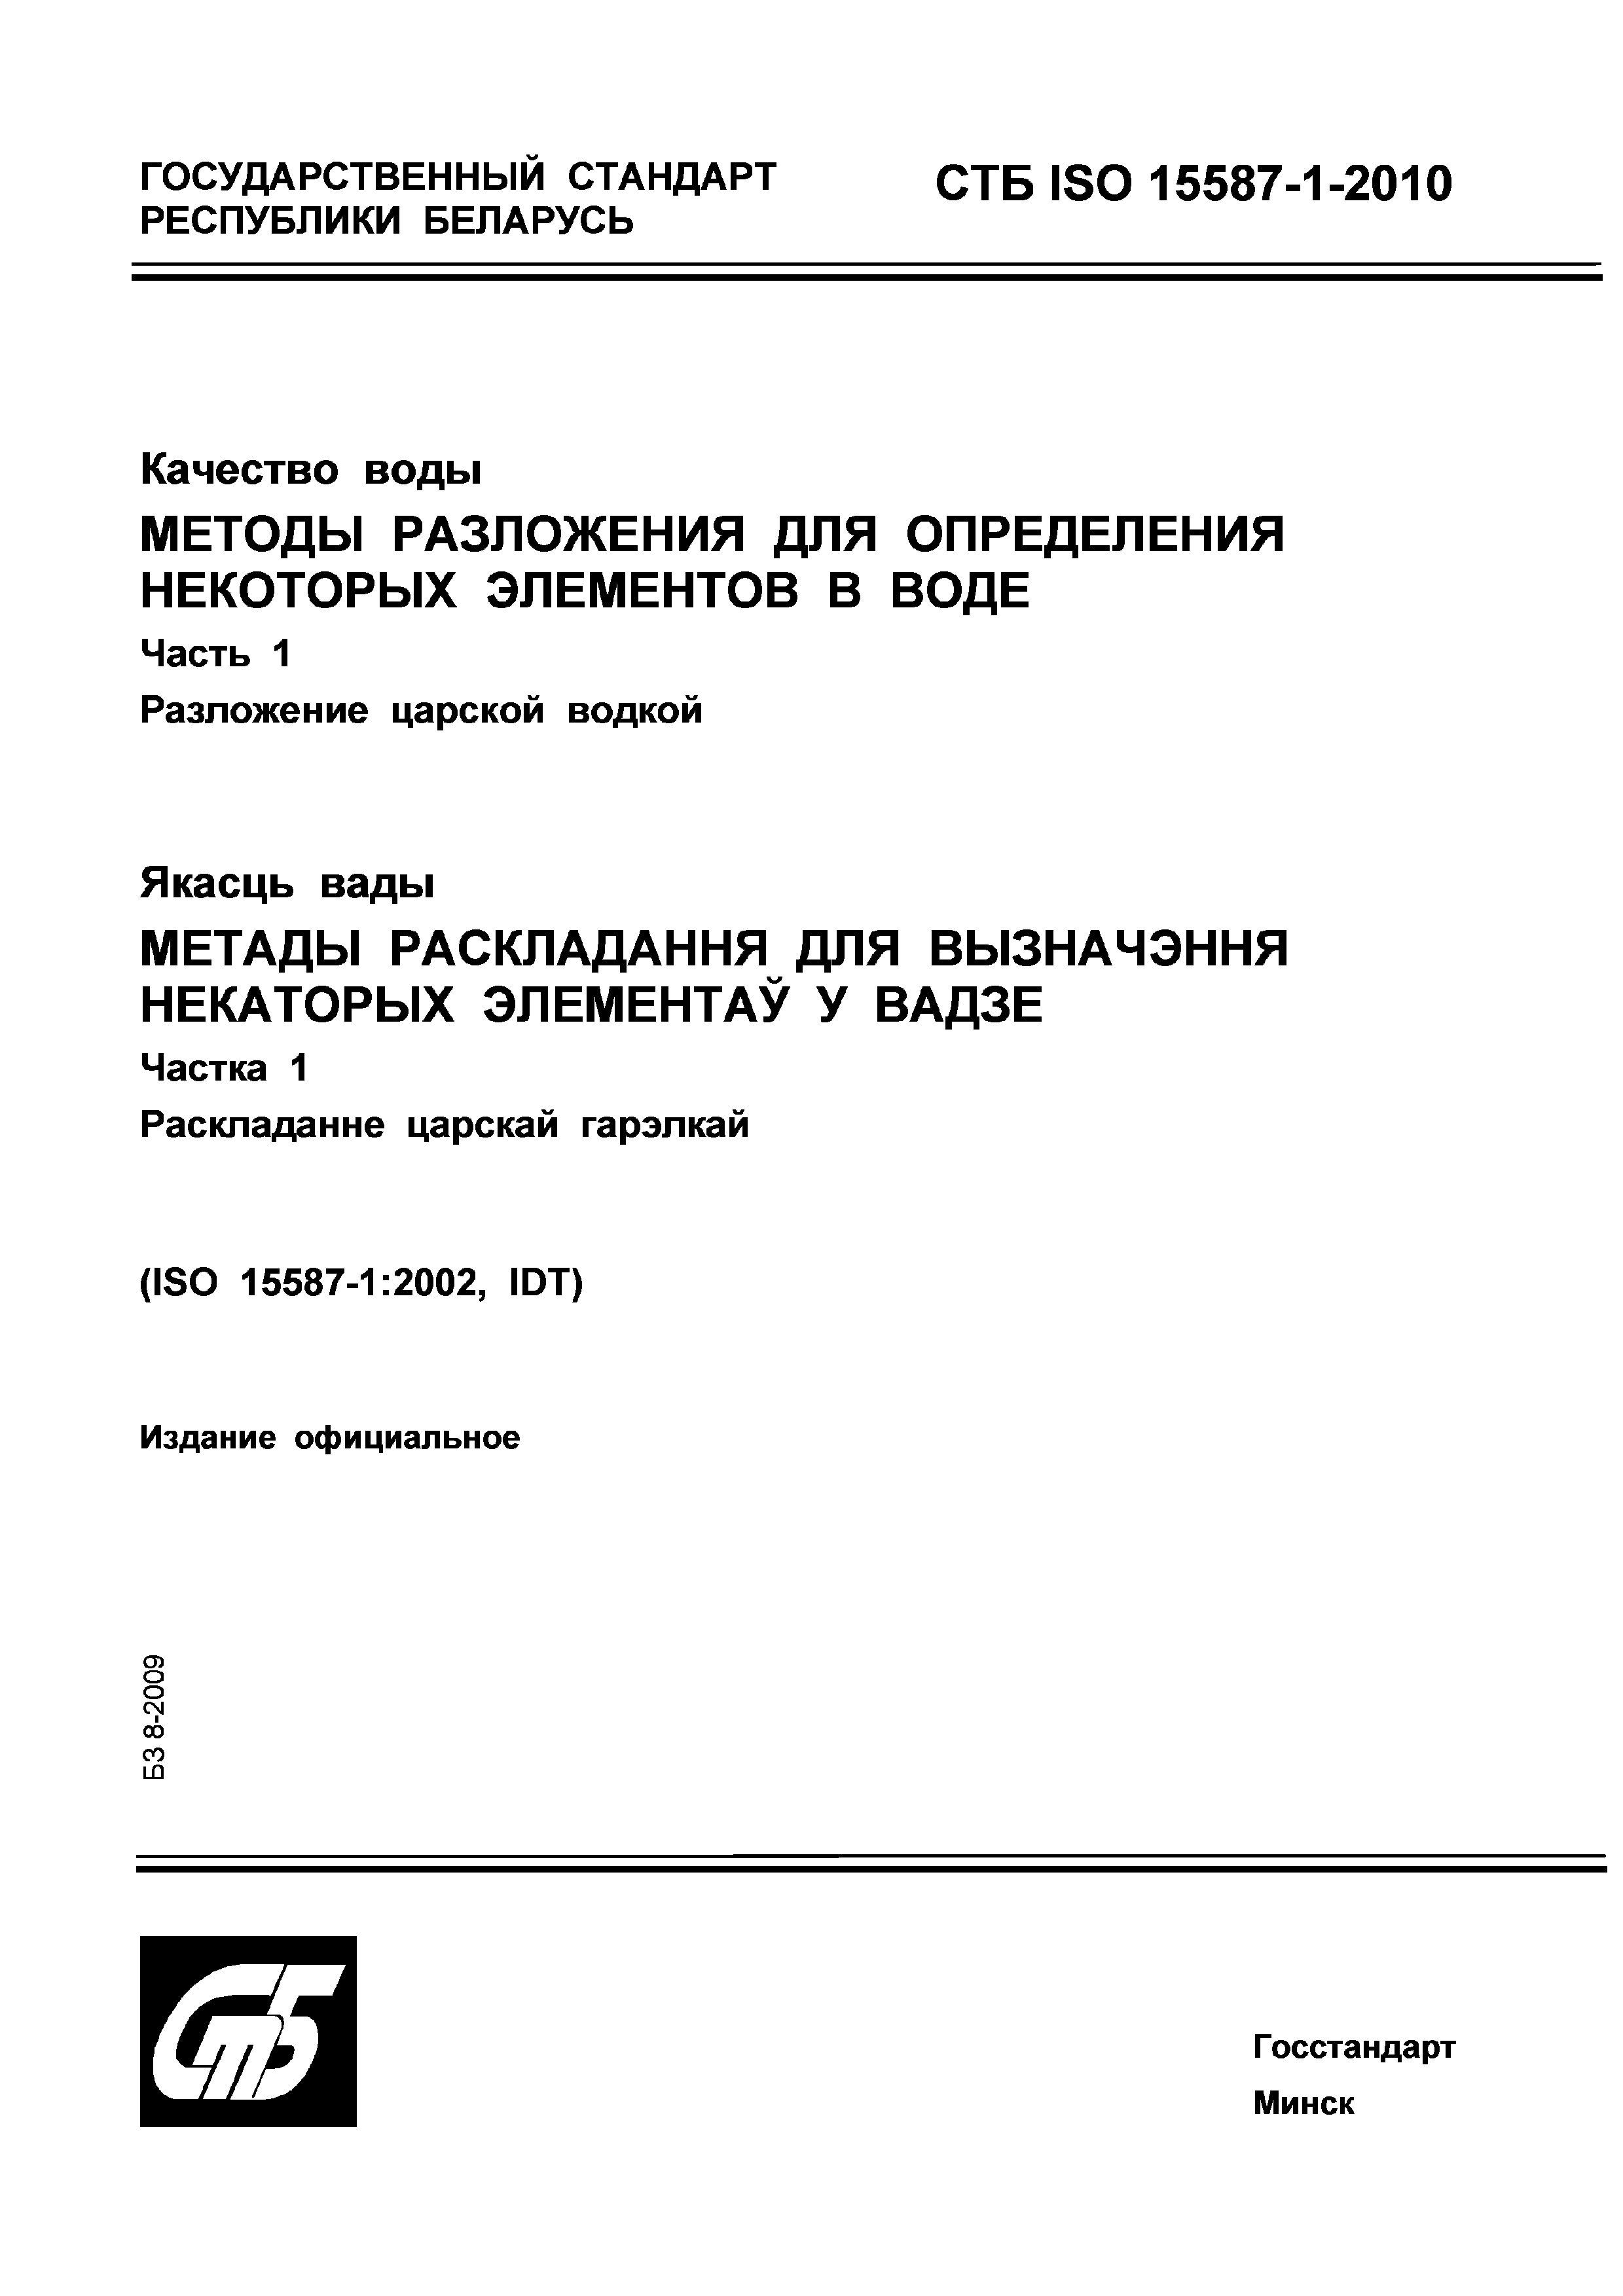 СТБ ISO 15587-1-2010